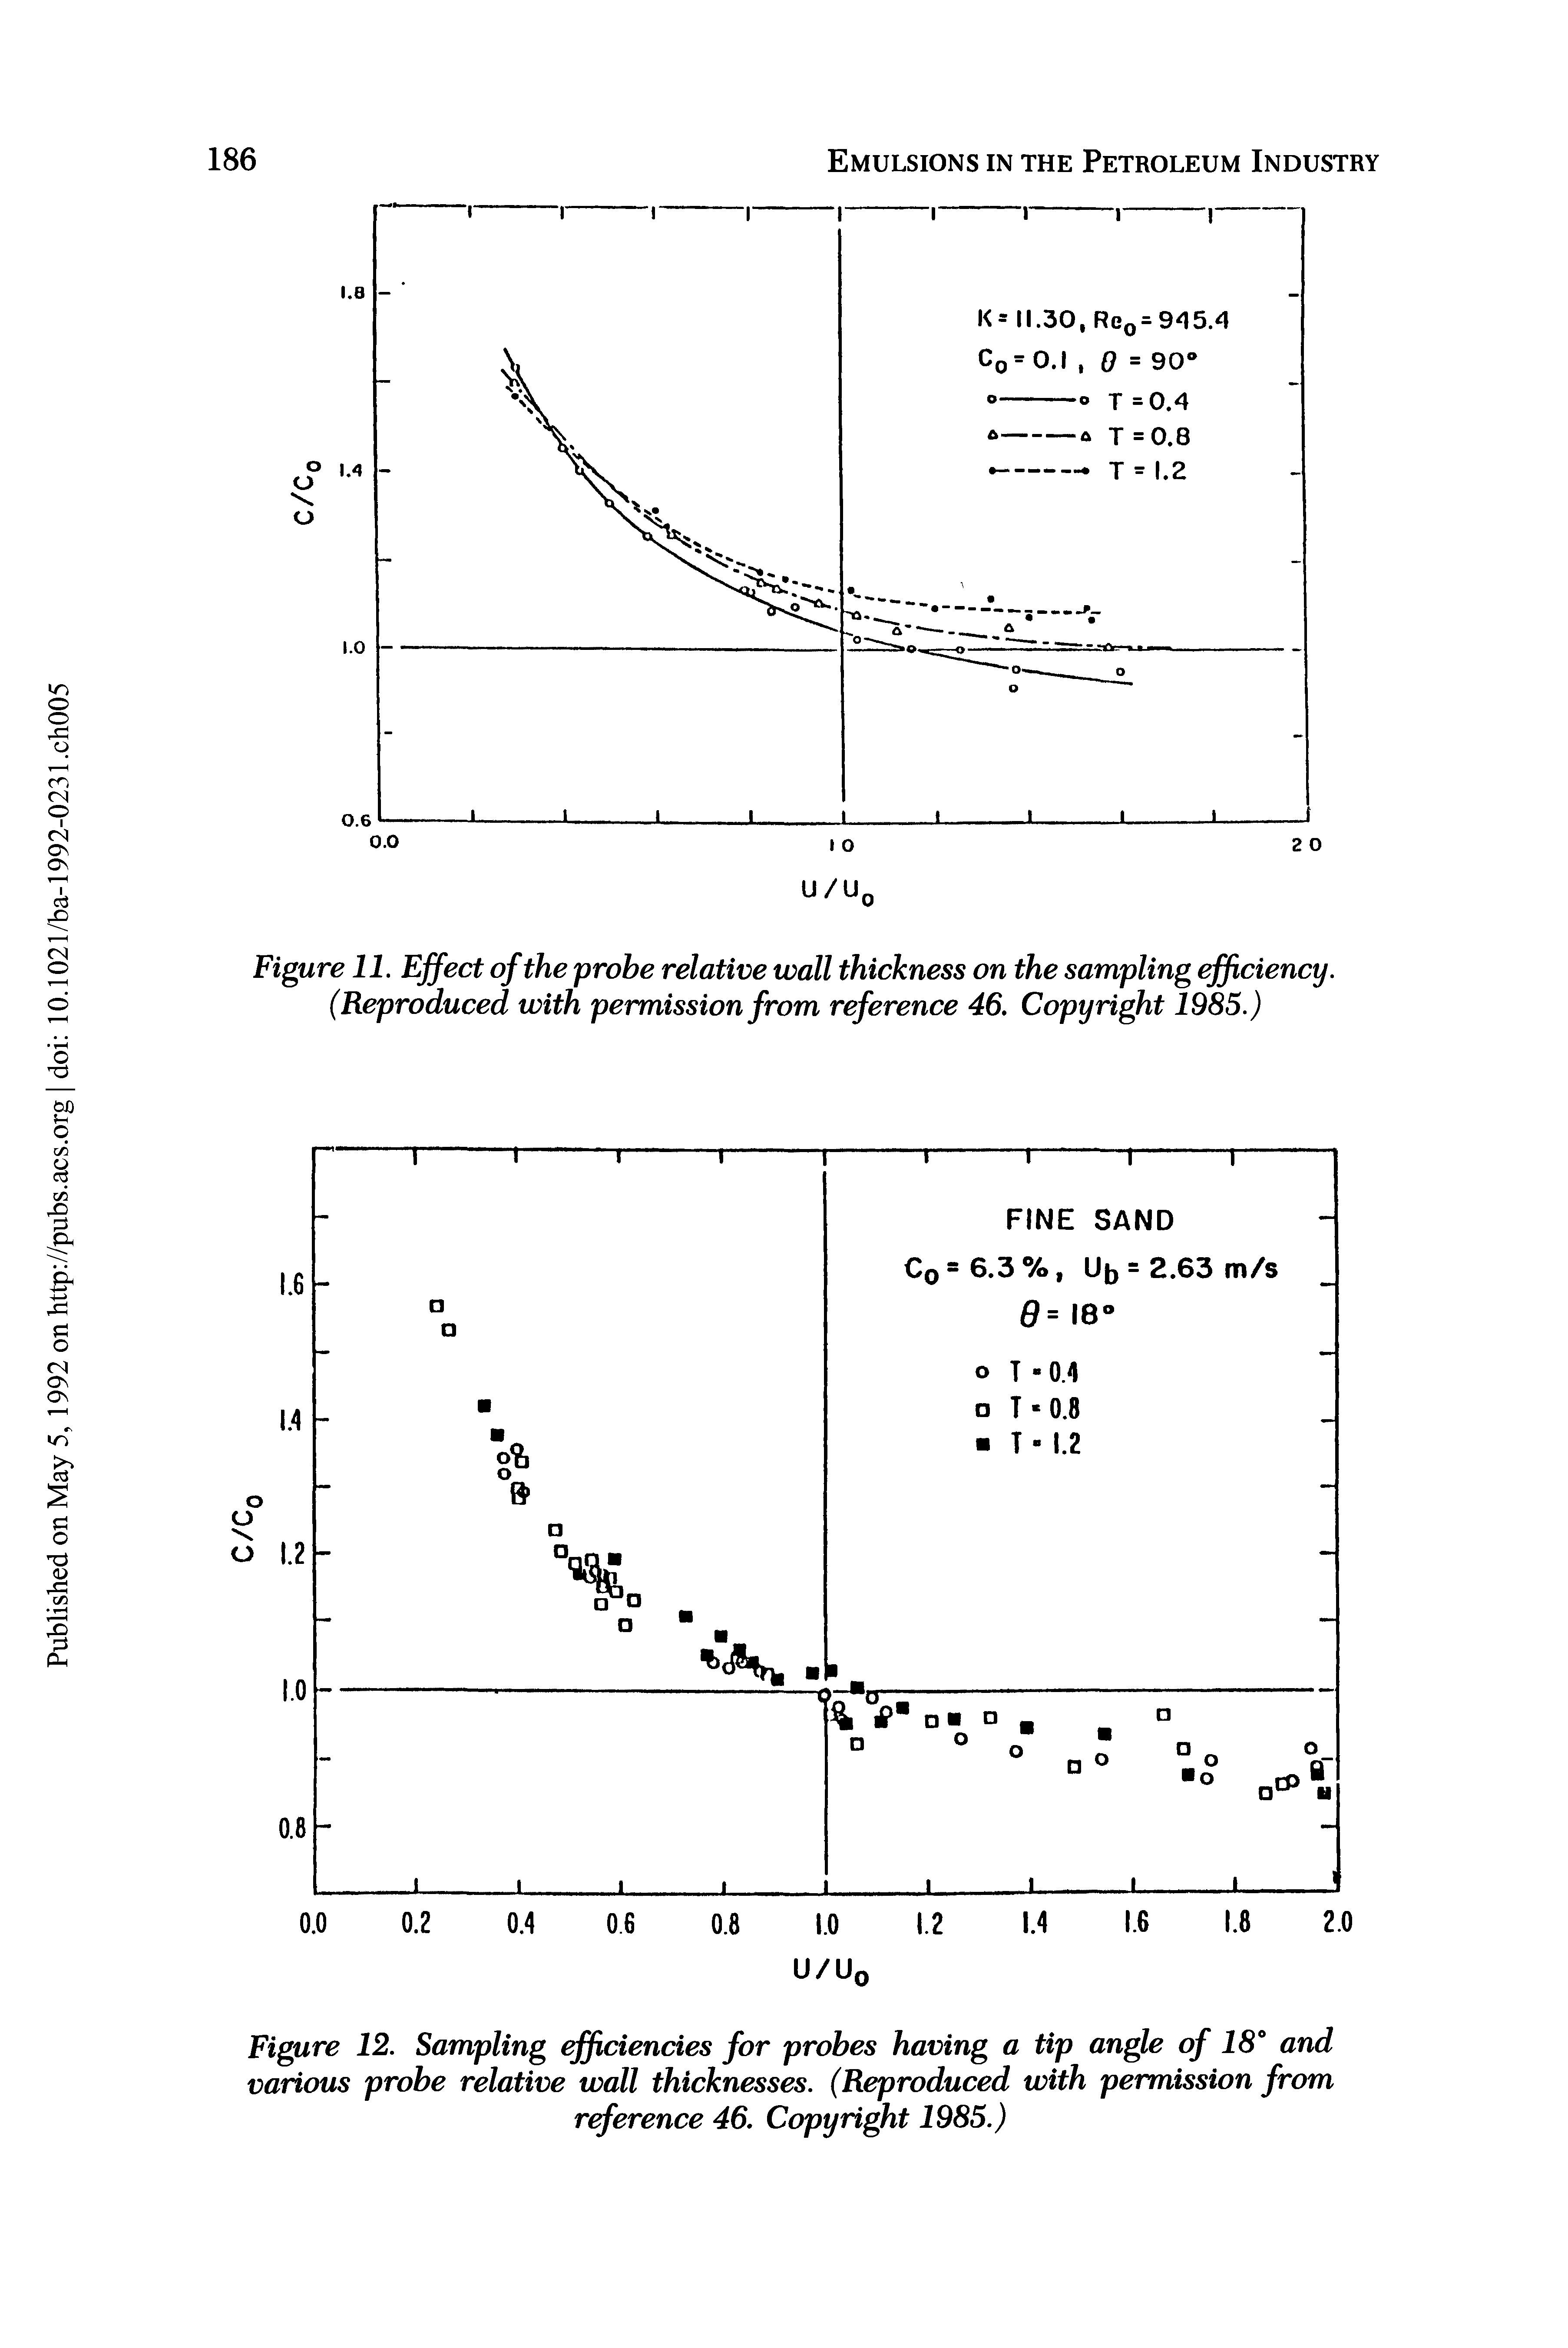 Figure 11. Effect of the probe relative wall thickness on the sampling efficiency. (Reproduced with permission from reference 46. Copyright 1985.)...